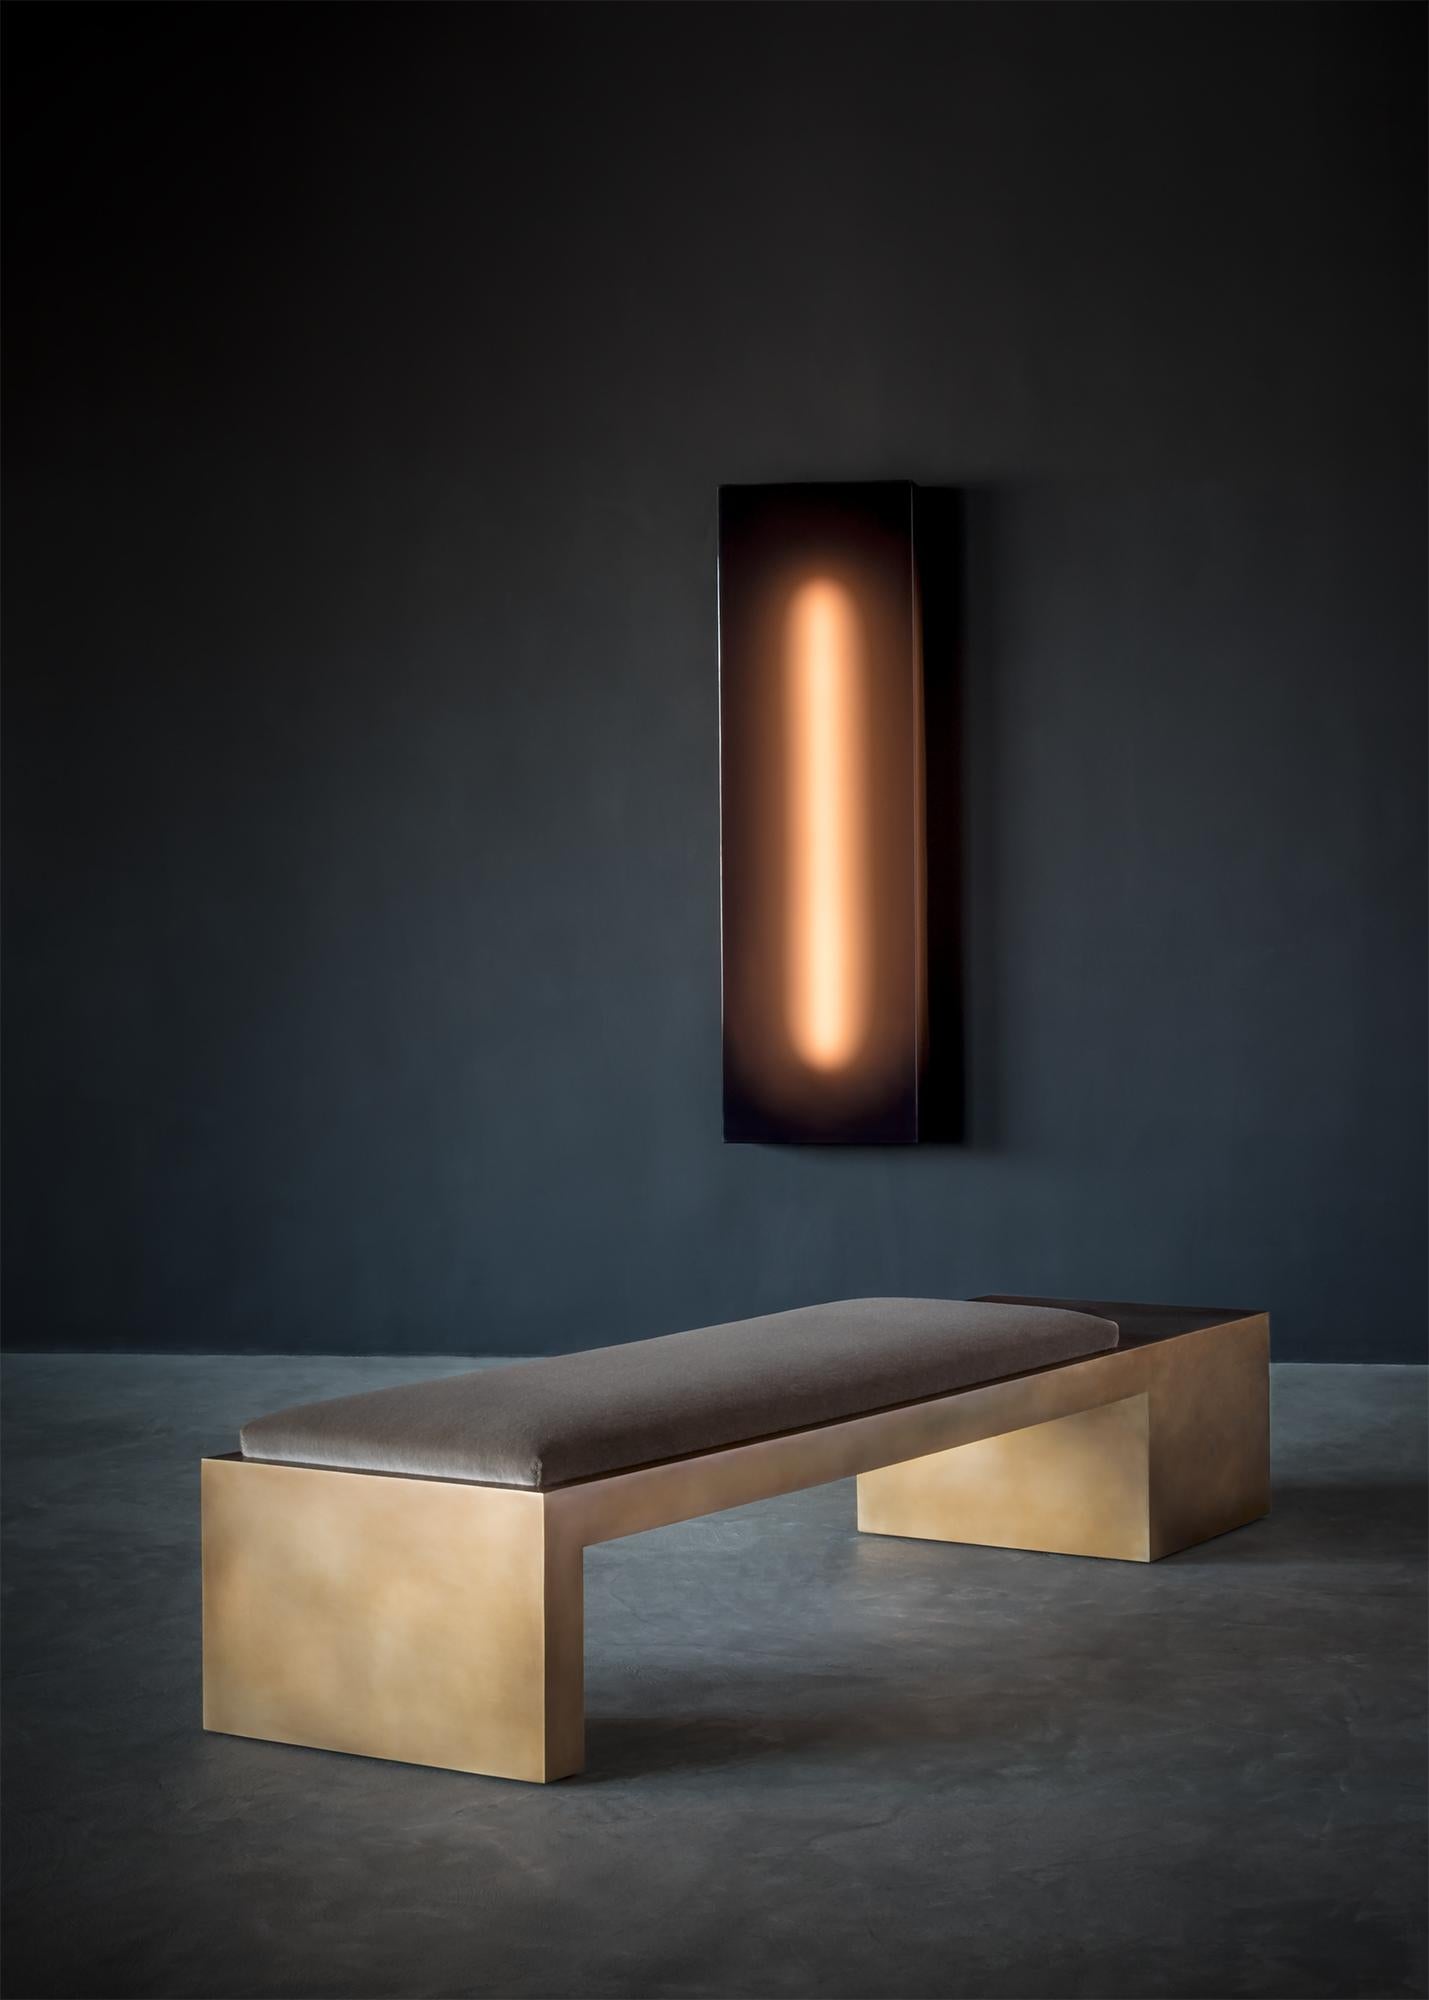 It is rare to find objects that combine Minimalist austerity with a luxurious sensibility. Offset Cube balances these two opposing qualities skillfully. Equally conceptual and functional, this sculptural bronze bench is characterized by a quiet